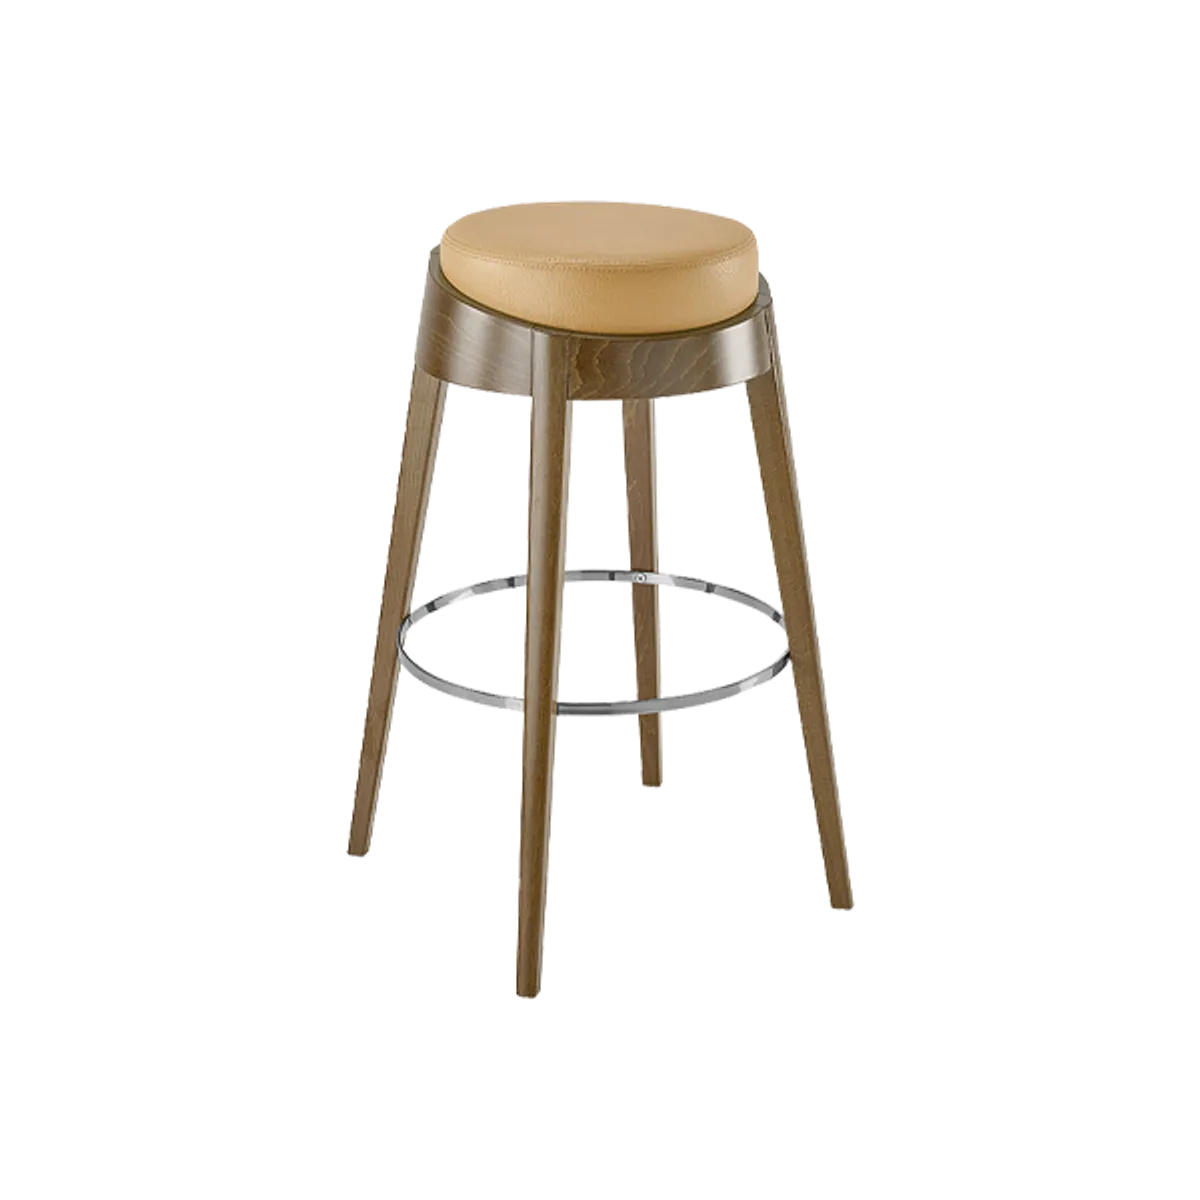 Kaiser Stool Inside Out Contracts